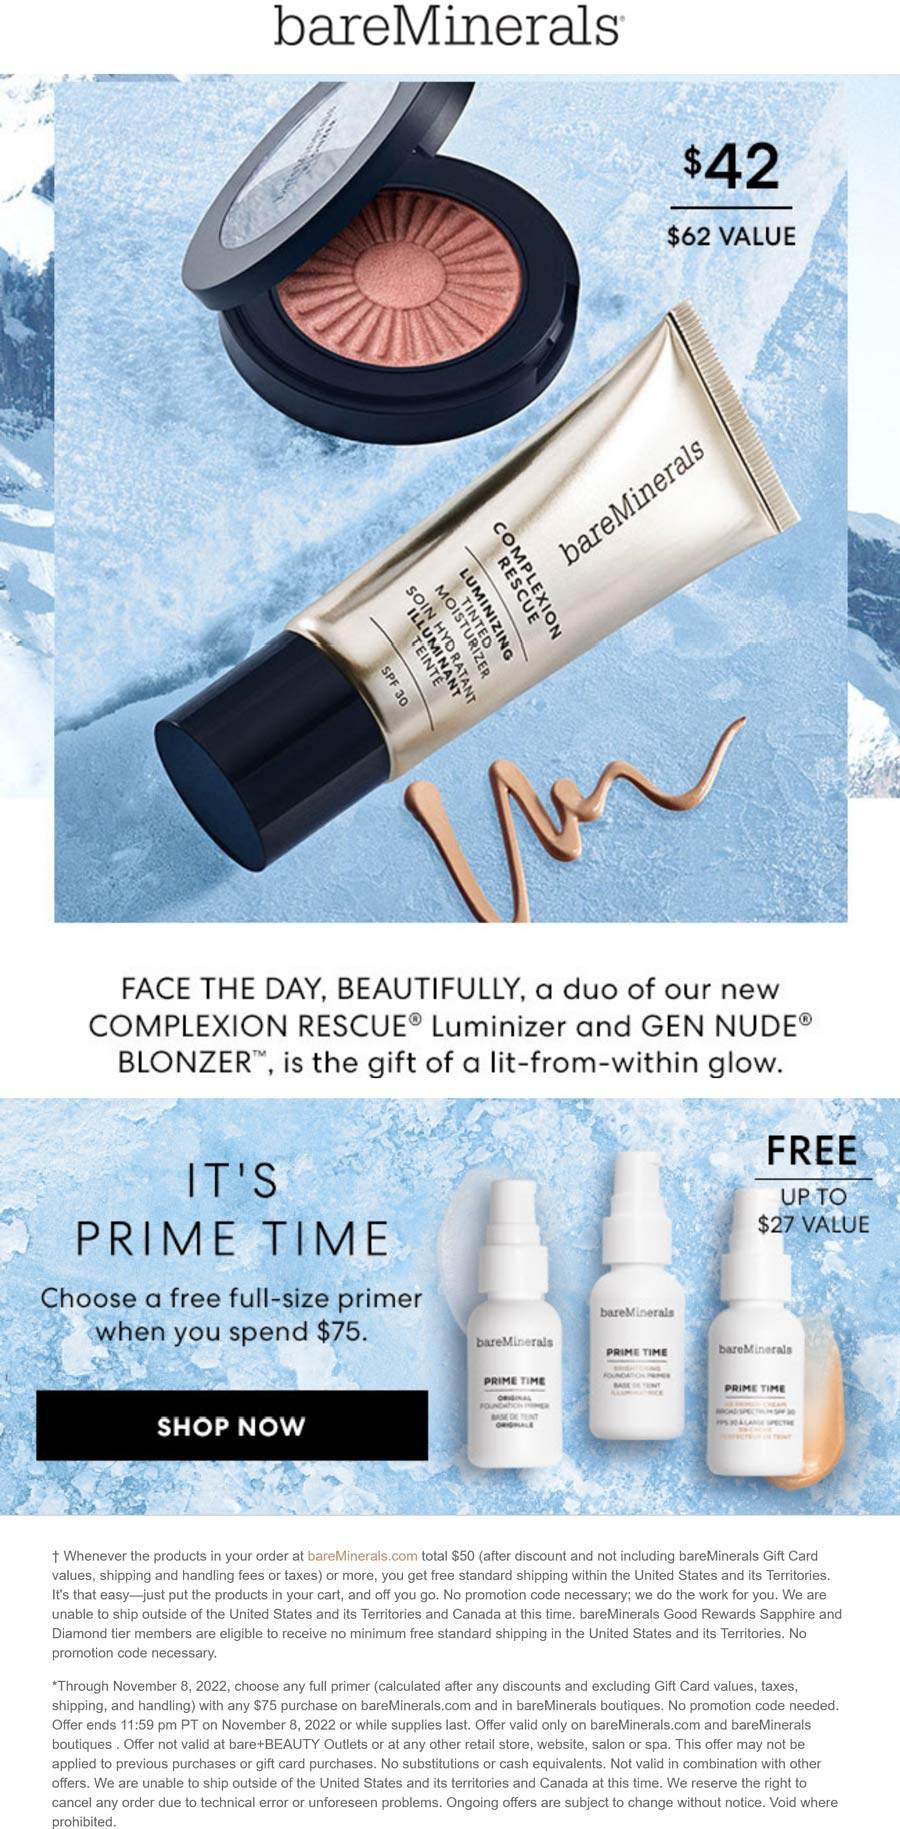 bareMinerals stores Coupon  Free full-size primer on $75 at bareMinerals, ditto online #bareminerals 